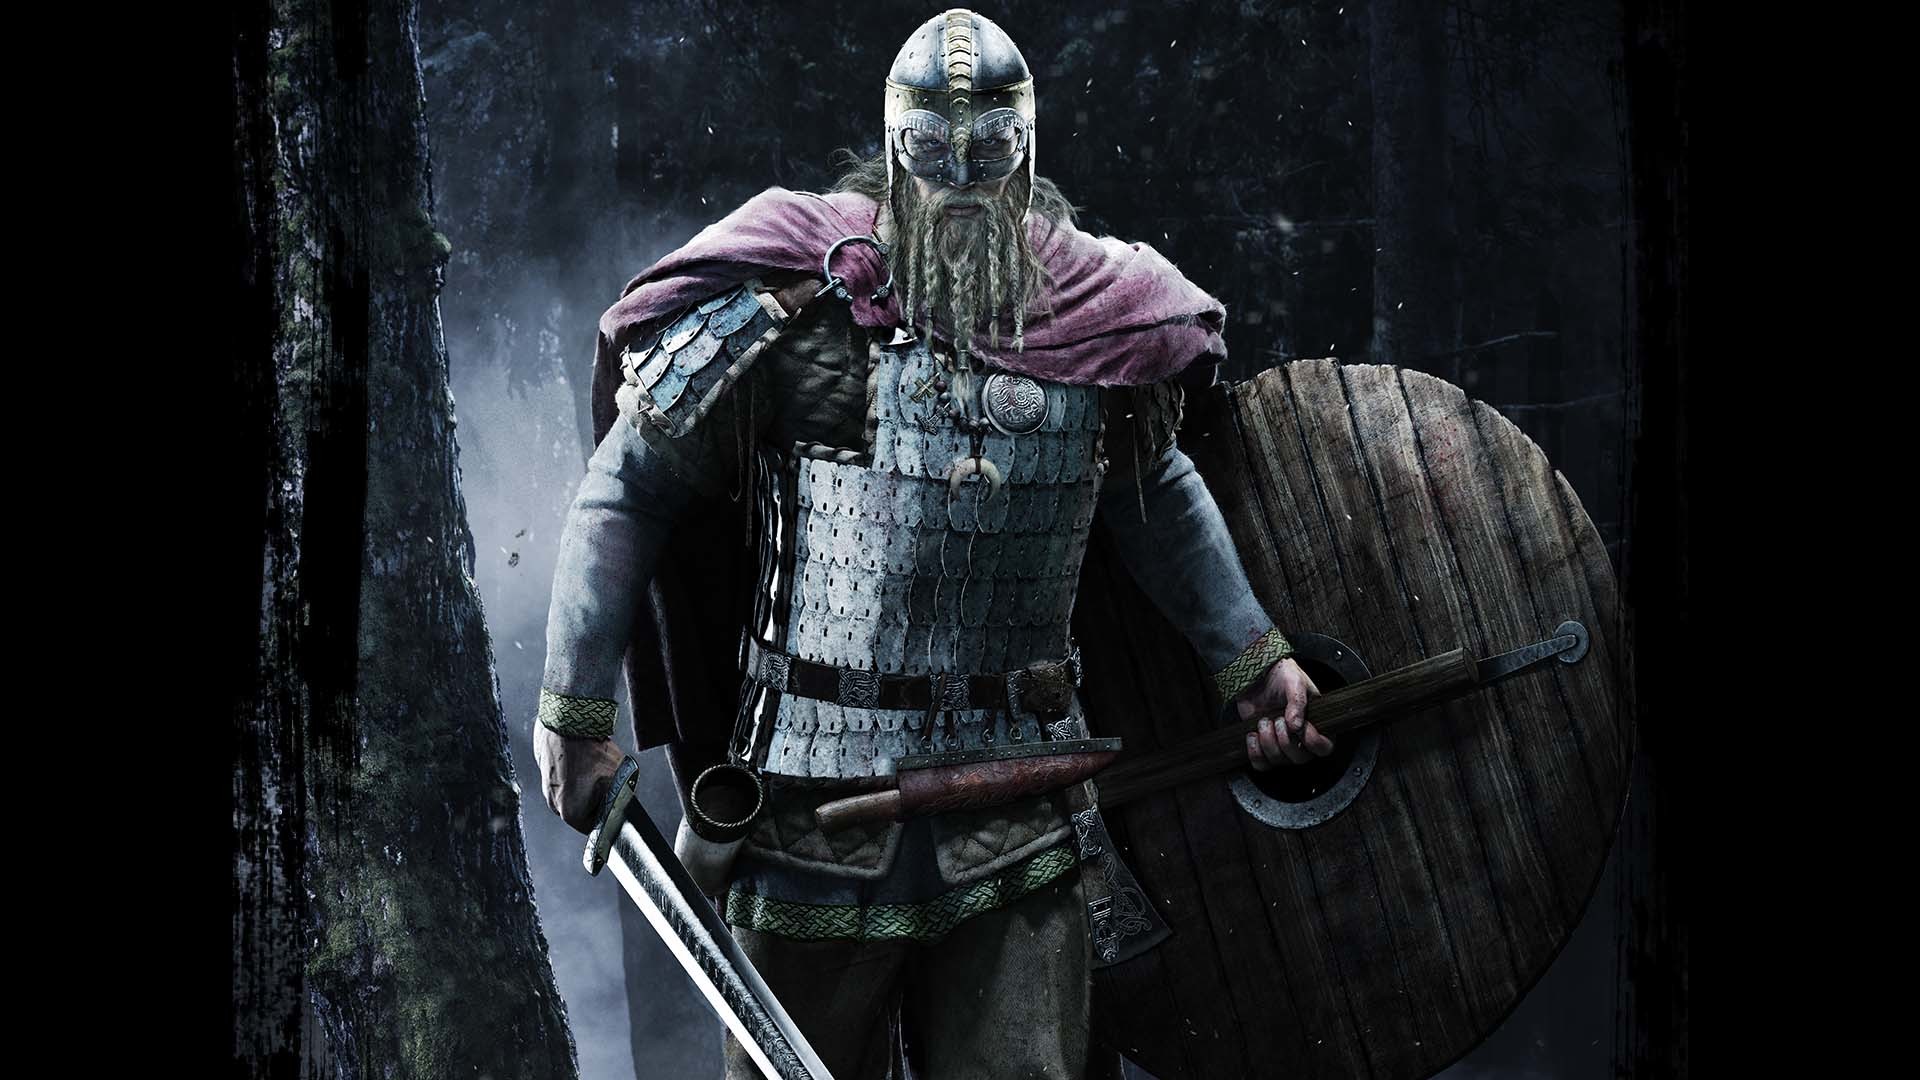 1920x1080 Ever wanted to become a Norse warrior? If so, then Norway is about to open  a school for Vikings, so don't miss the chance to become a student!